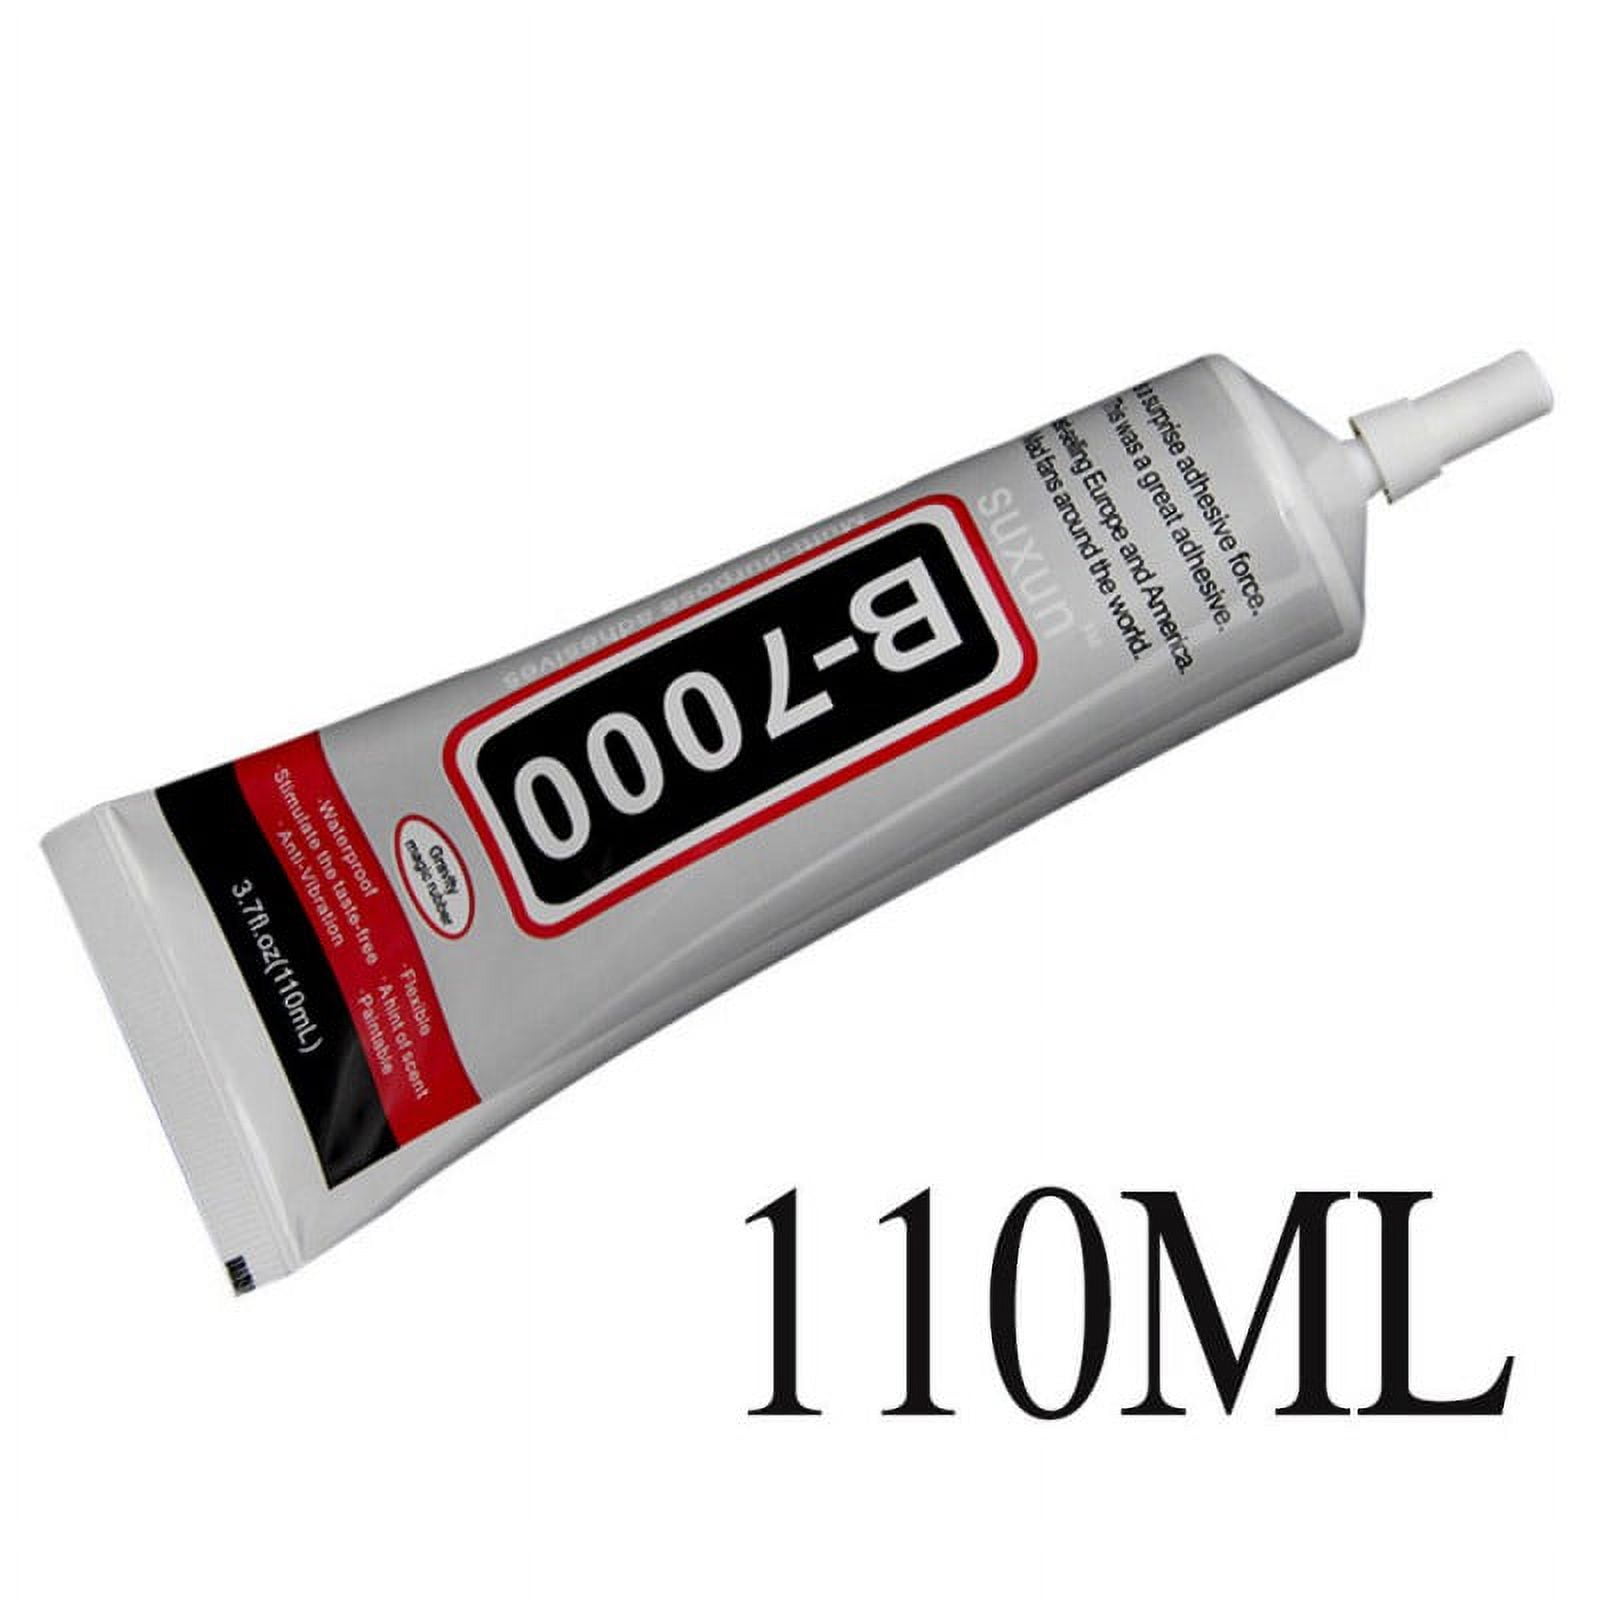 50ml B-7000 Adhesive, Multi-function Glues Paste Adhesive Suitable for Glass,Wooden, Jewelery,Mobile Phone Screen Glue, Size: 110 mL, Silver